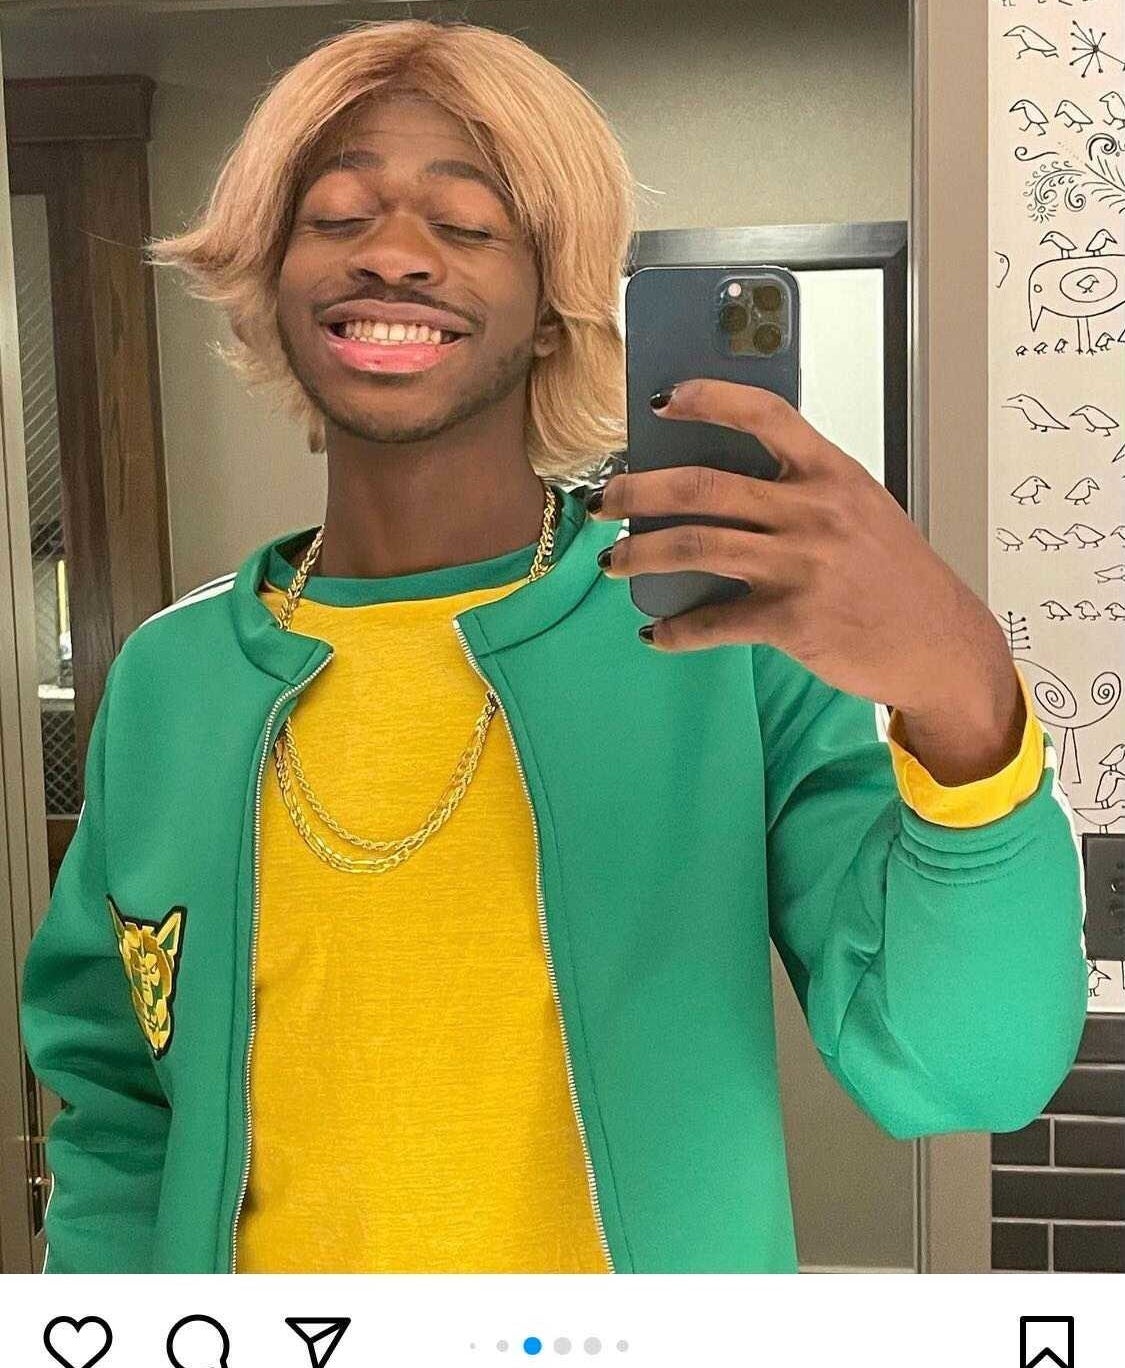 Lil Nas X Neds Declassified School Survival Guide Costume